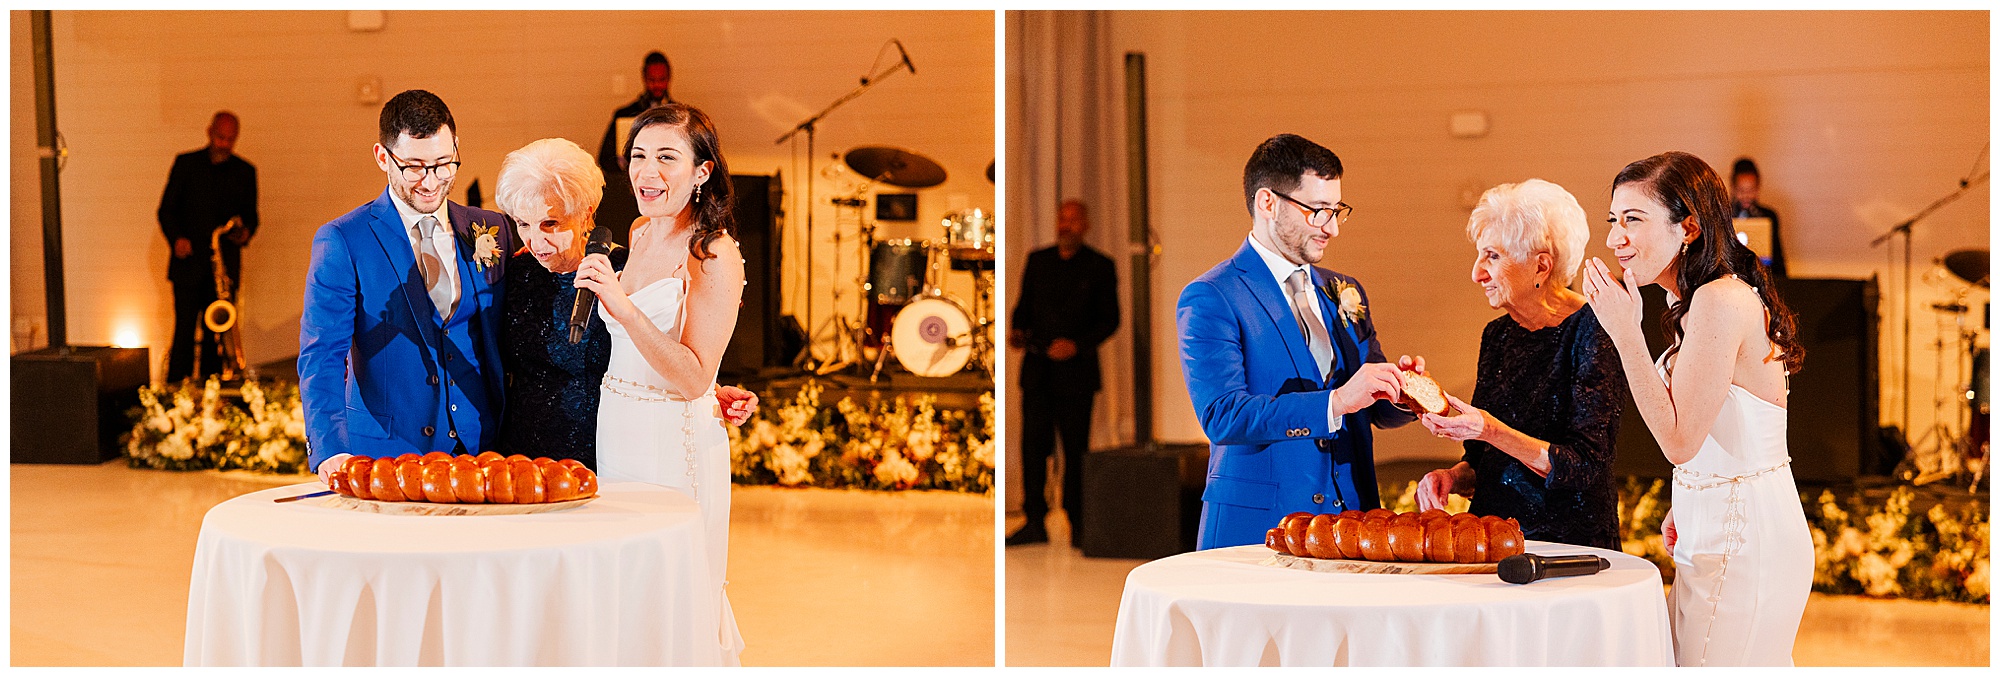 Candid winter wedding at the ravel hotel